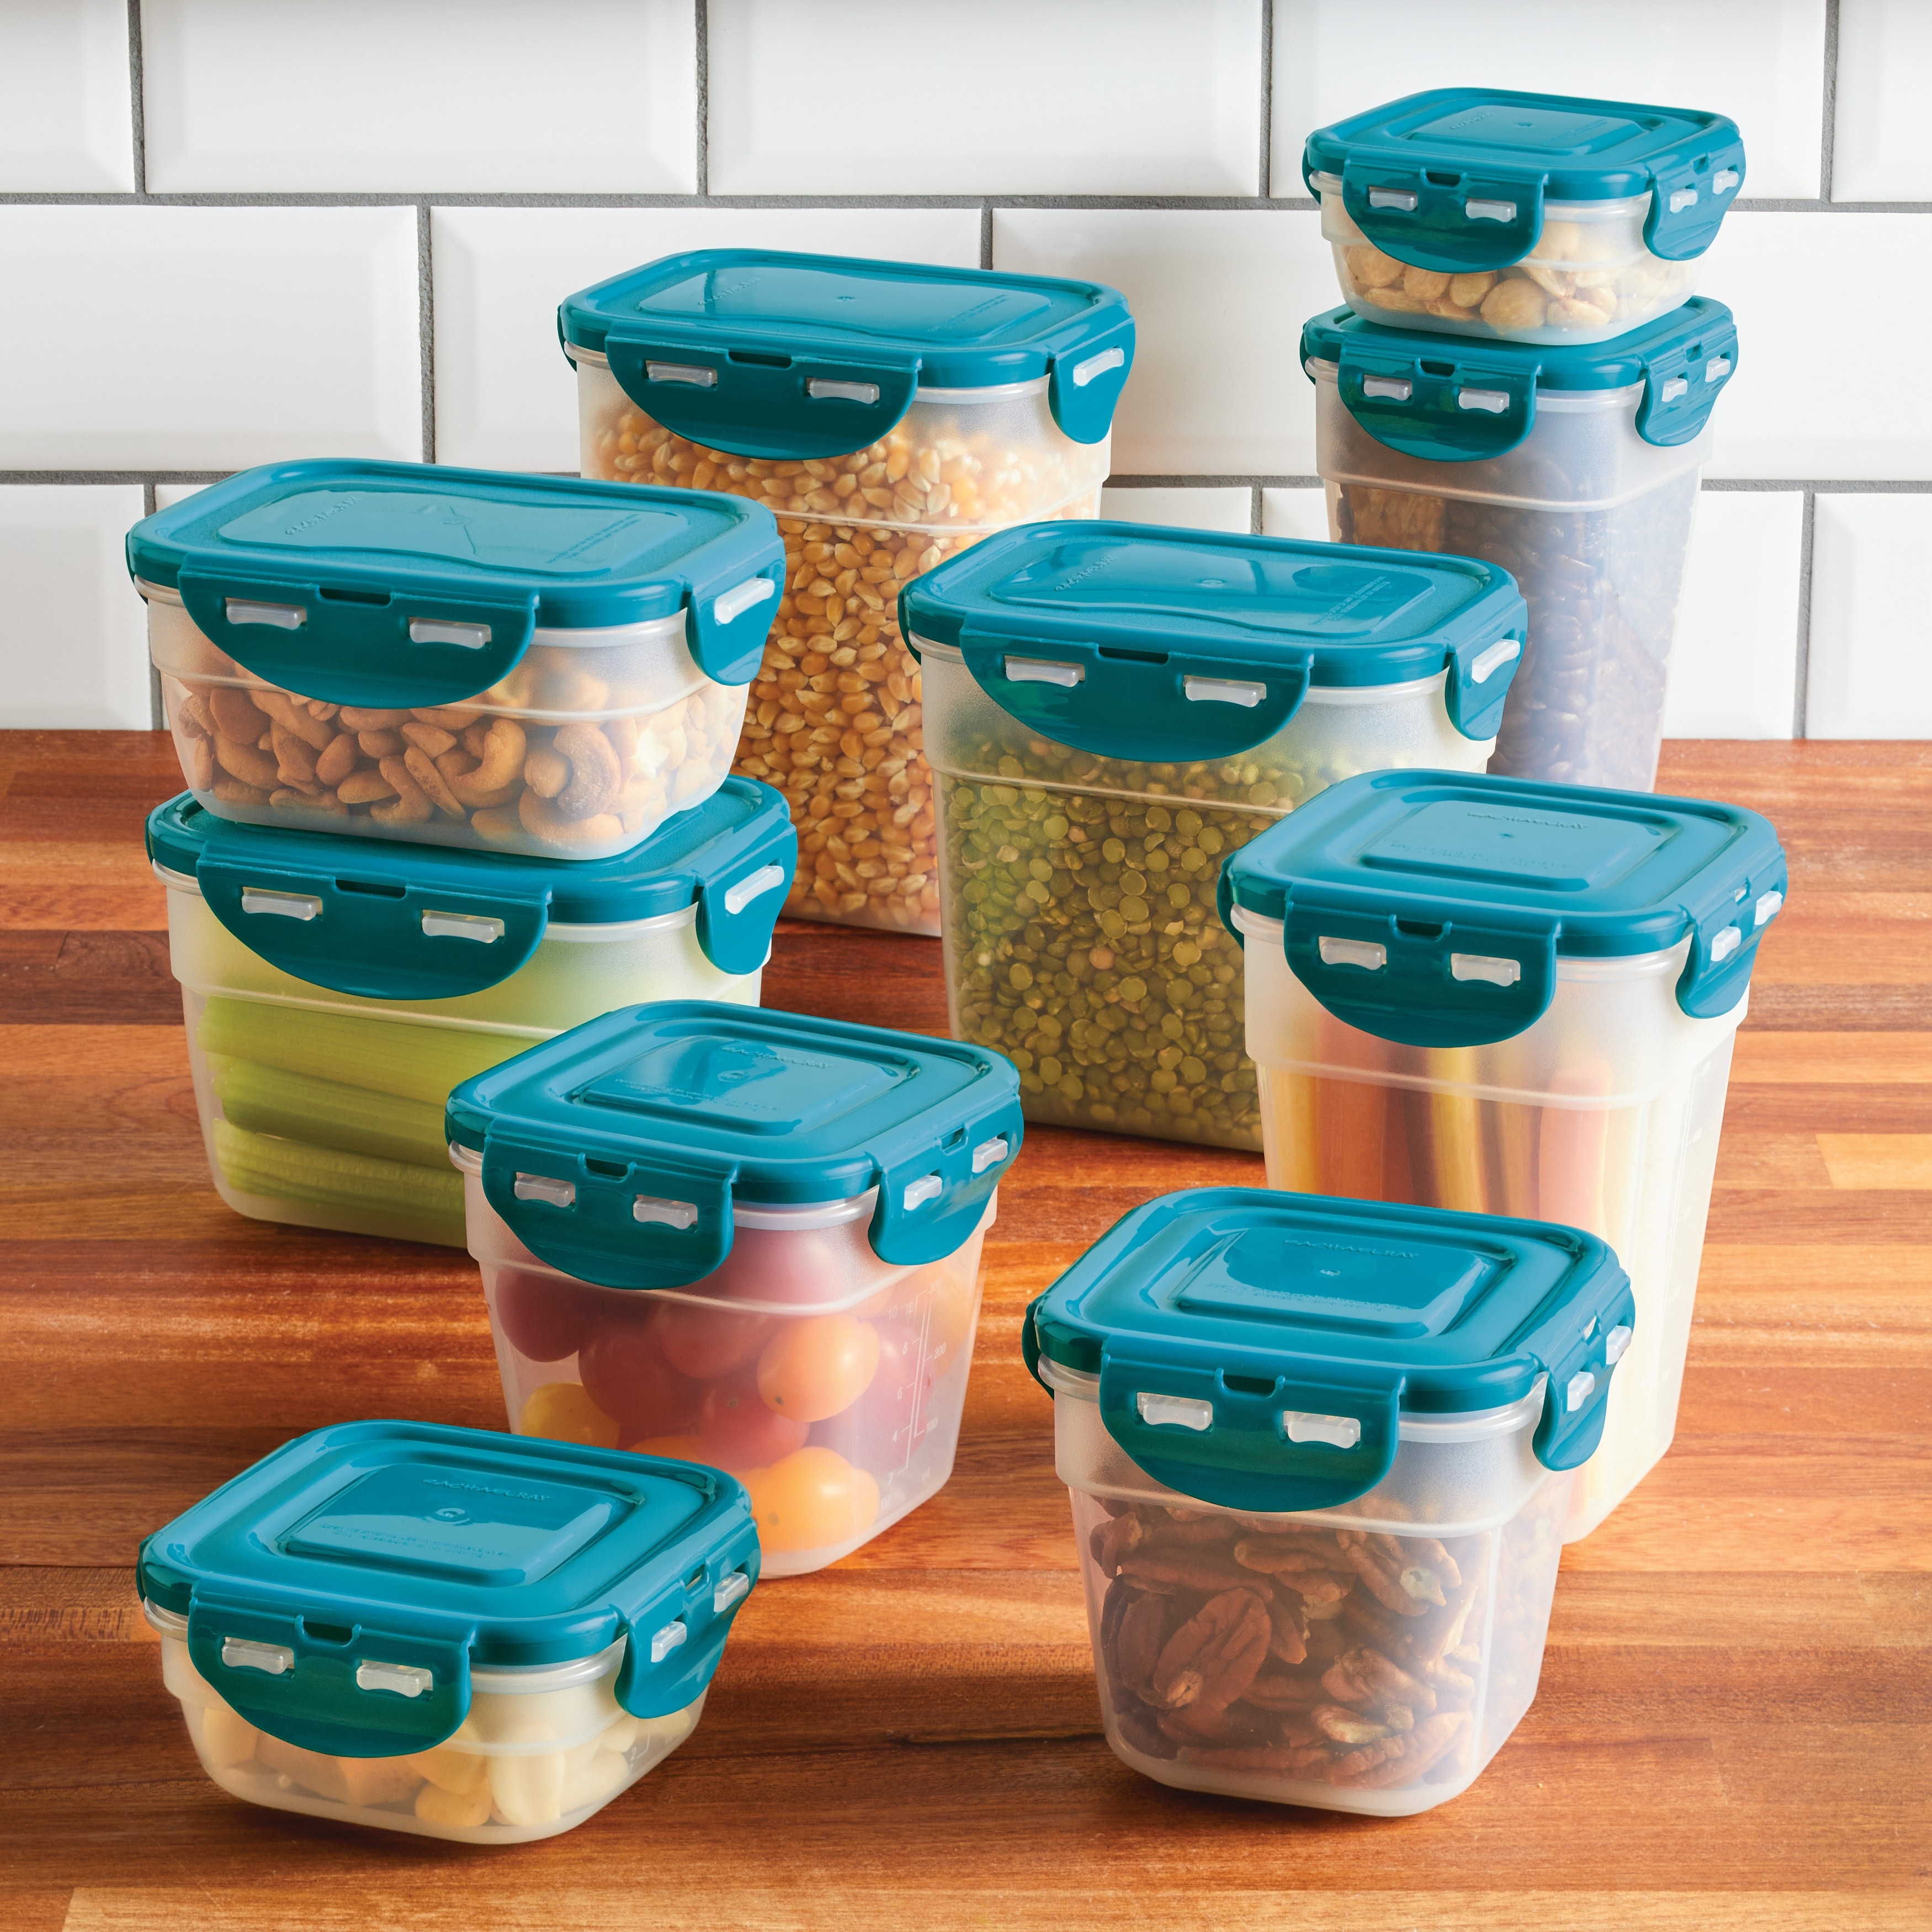 https://ak1.ostkcdn.com/images/products/is/images/direct/fc3402b640da49b722e1492bbfcae77cf7952d11/Rachael-Ray-Leak-Proof-Stacking-Food-Storage-Container-Set.jpg